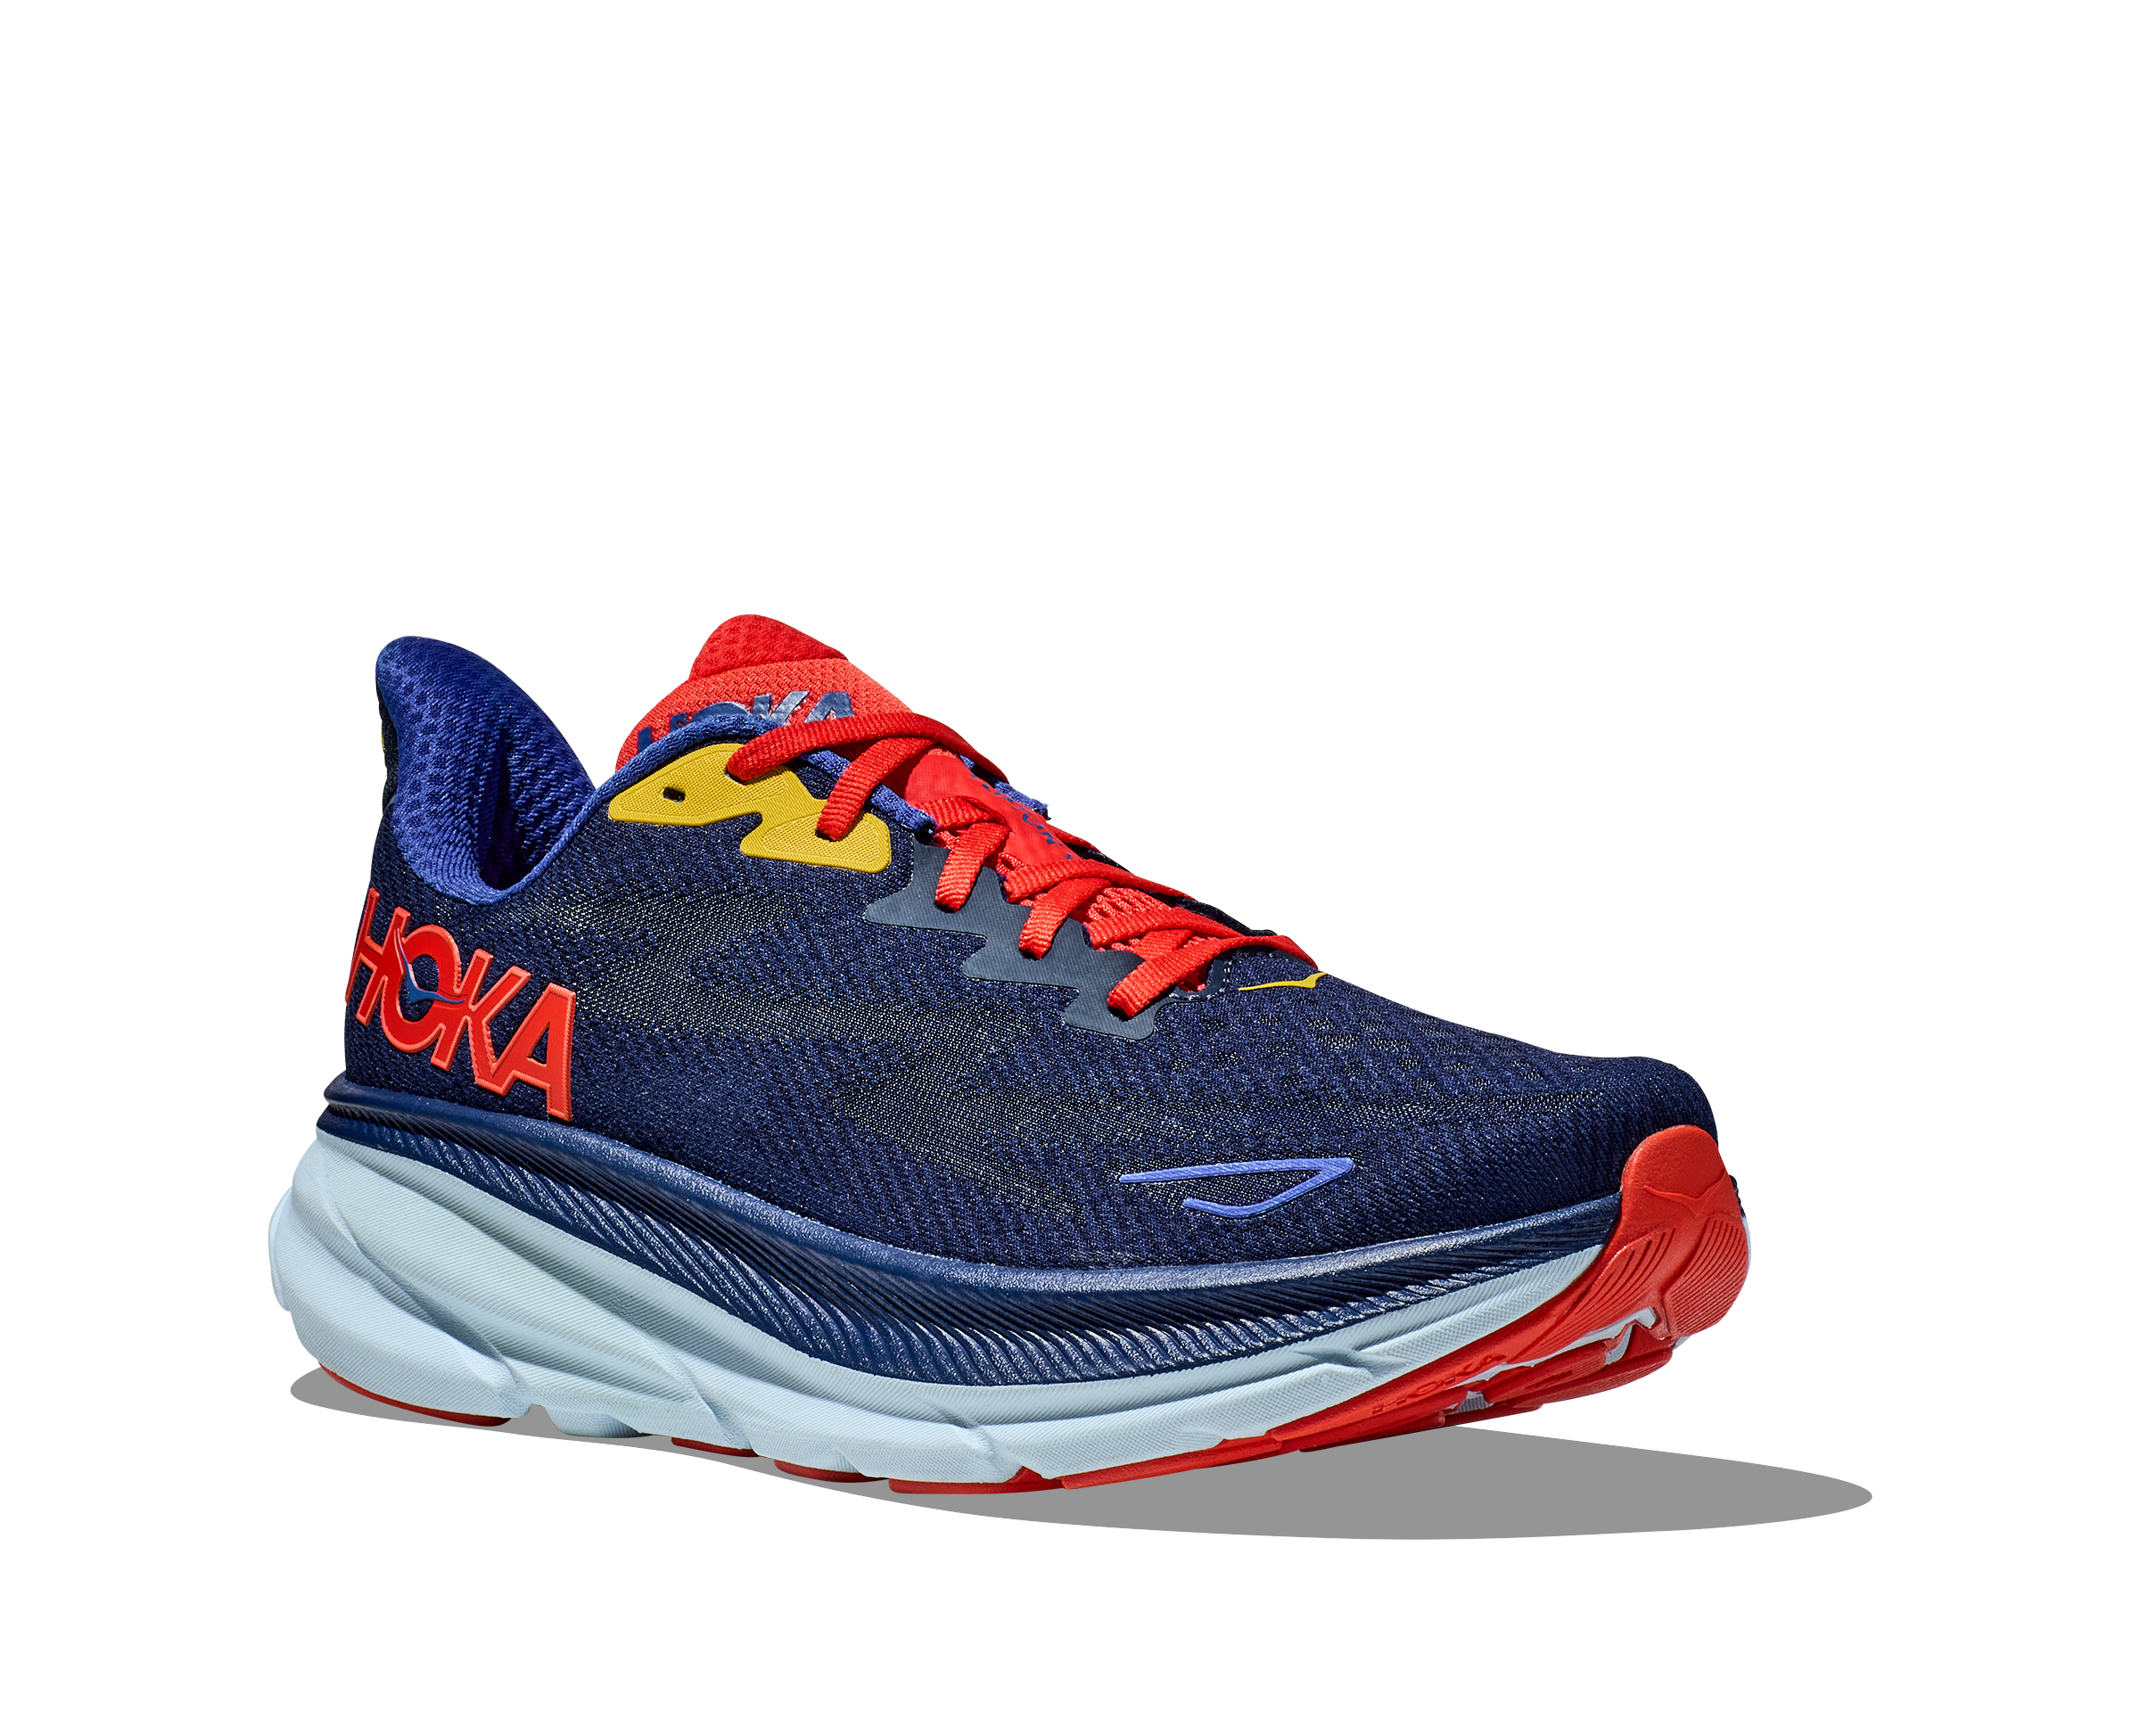 Men's Hoka One One Clifton 9 Color: Bellwether Blue / Dazzling Blue